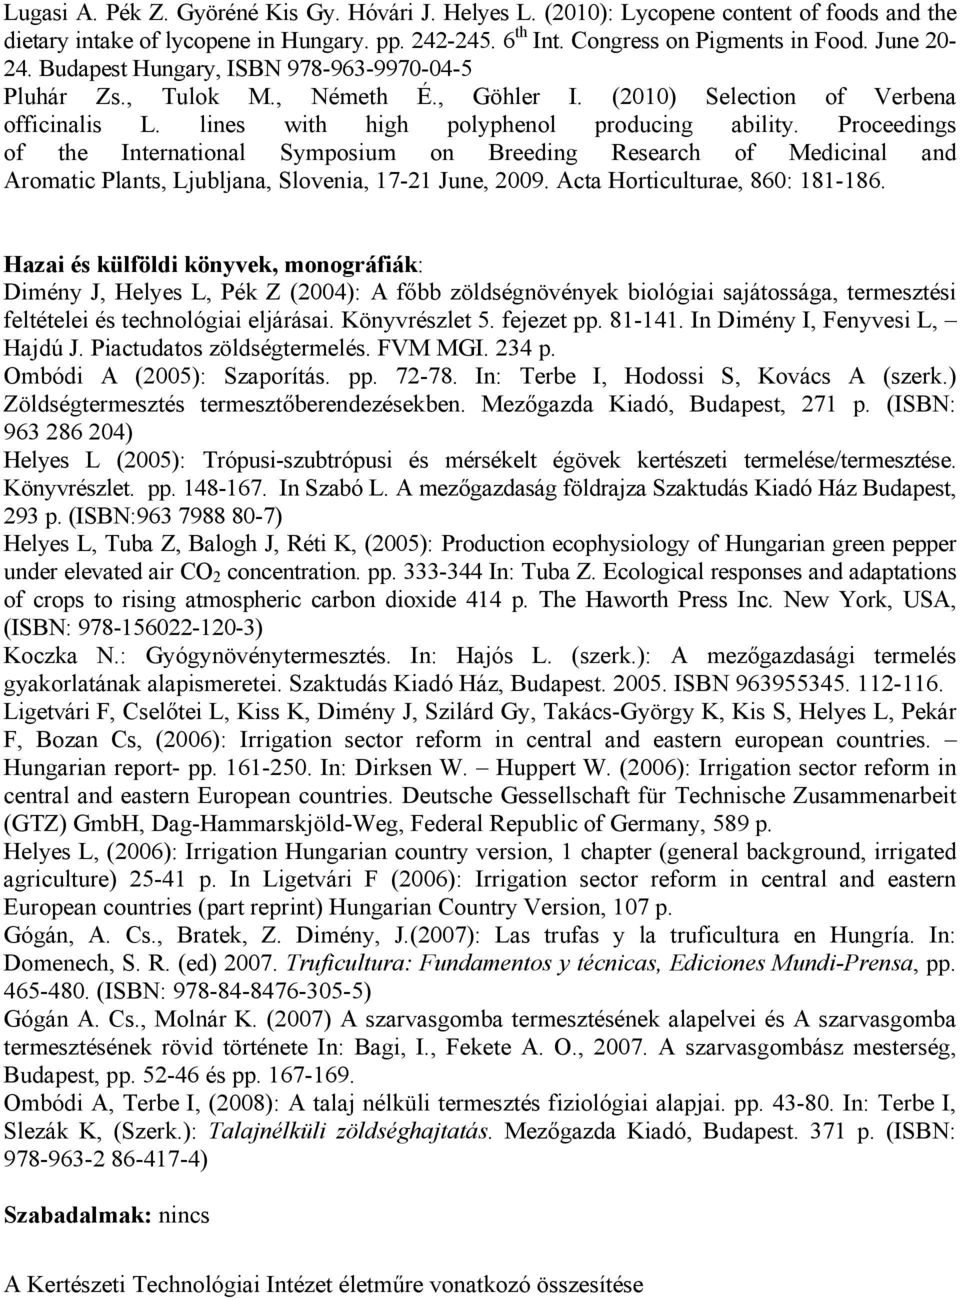 Proceedings of the International Symposium on Breeding Research of Medicinal and Aromatic Plants, Ljubljana, Slovenia, 17-21 June, 2009. Acta Horticulturae, 860: 181-186.